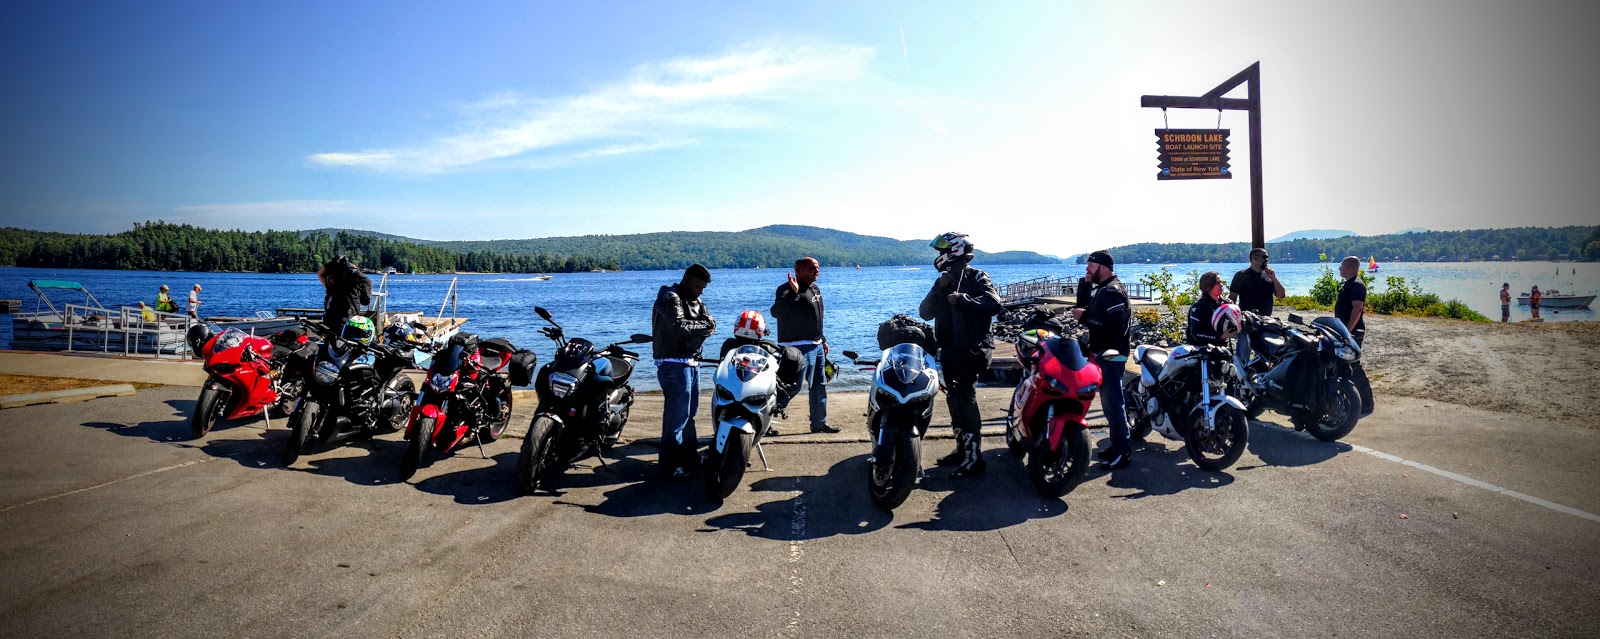 Tigh Loughhead and the East Coast Ducs at the Schroon Lake, New York